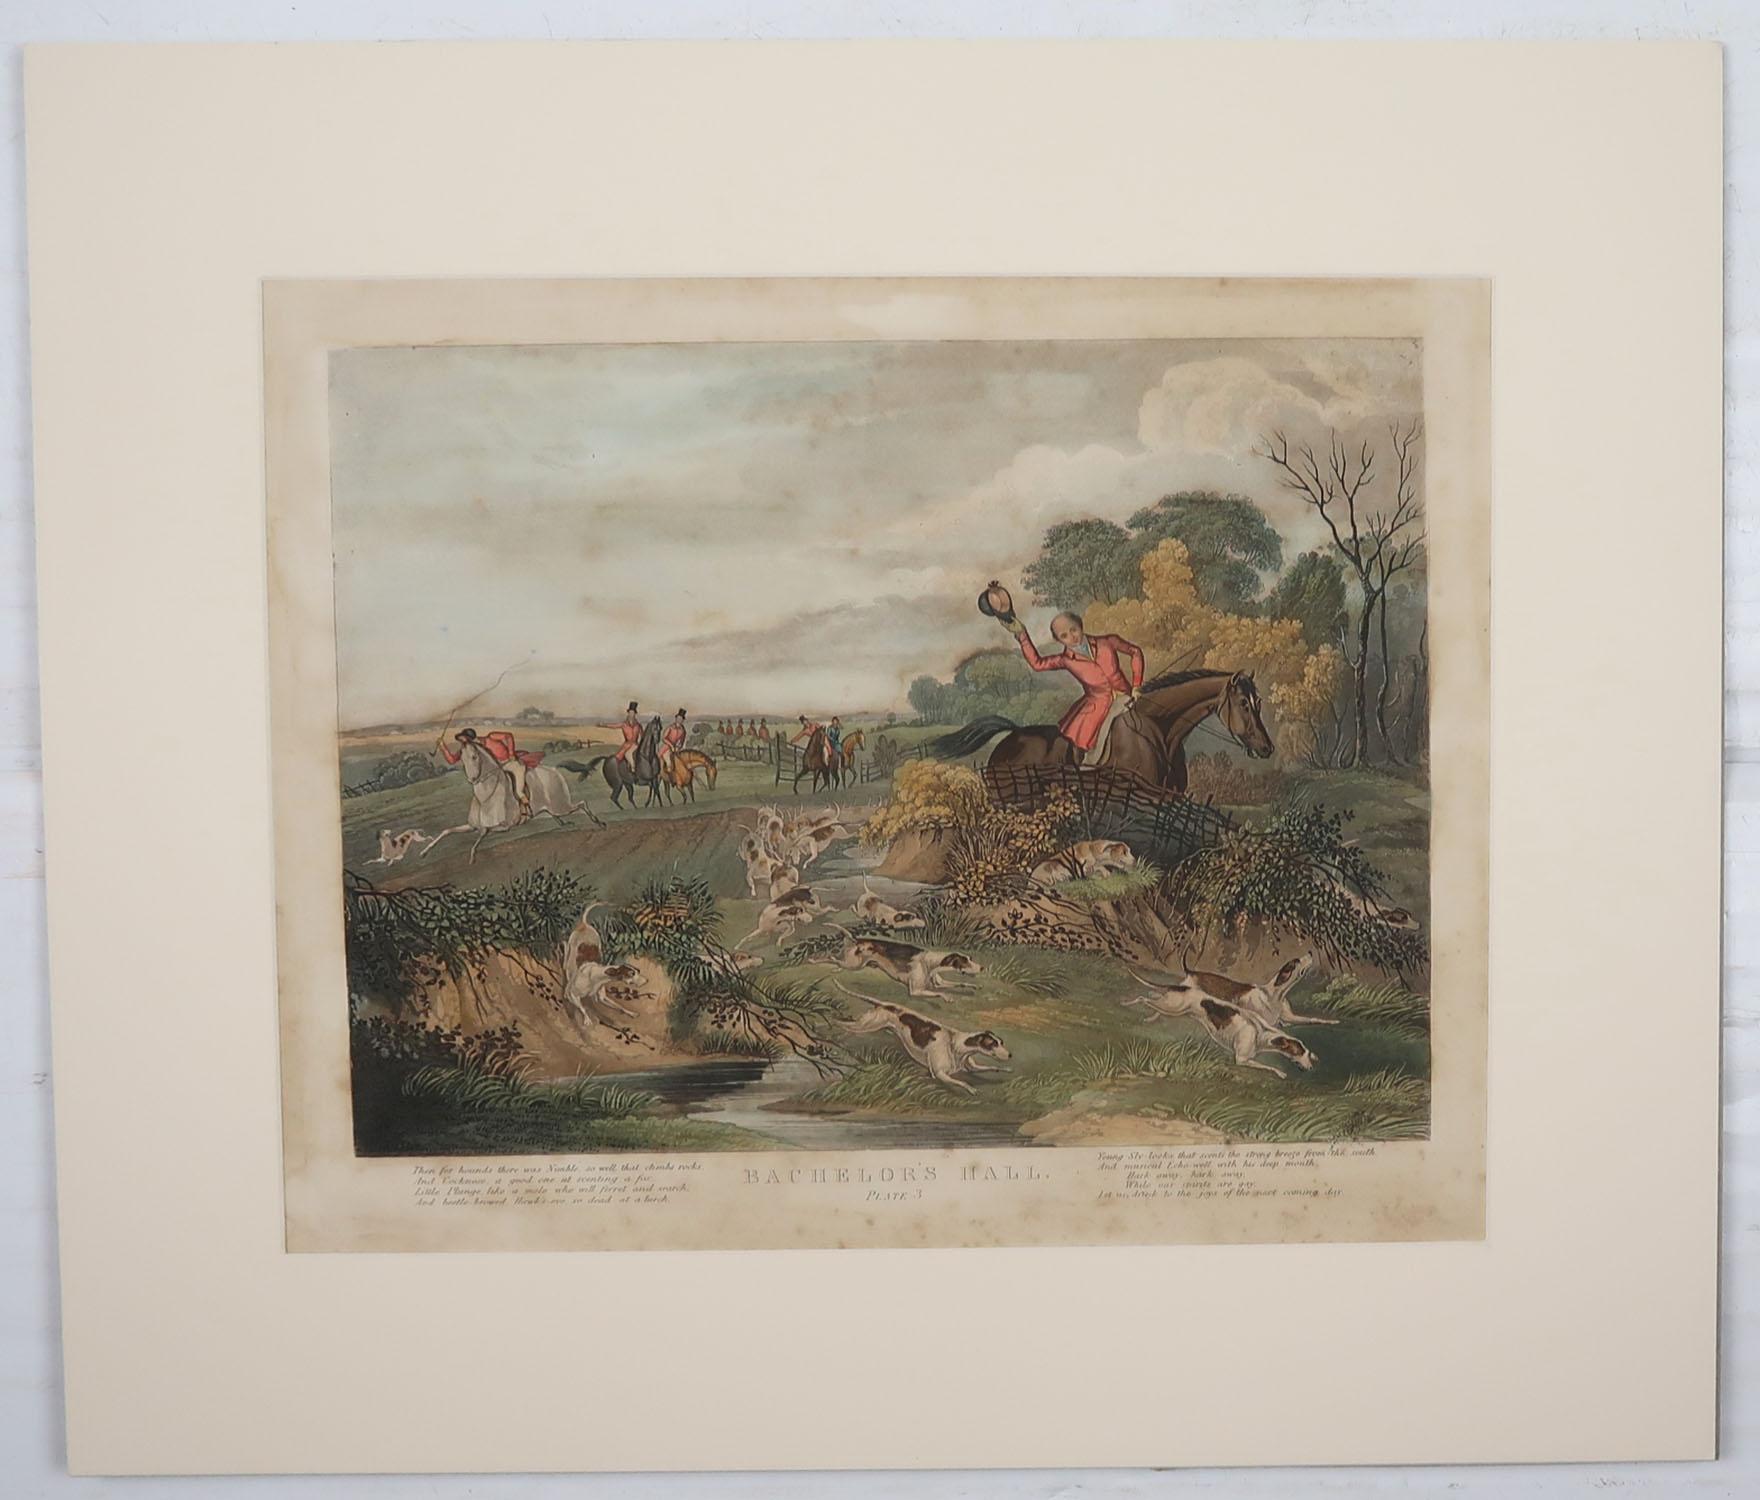 Great set of sporting prints. 

This is a complete set of the Bachelors Hall Series.

Hand colored aquatint engravings on wove paper

Engraved by George Hunt after Francis Calcroft Turner

Not dated but early 19th century. Estimated circa